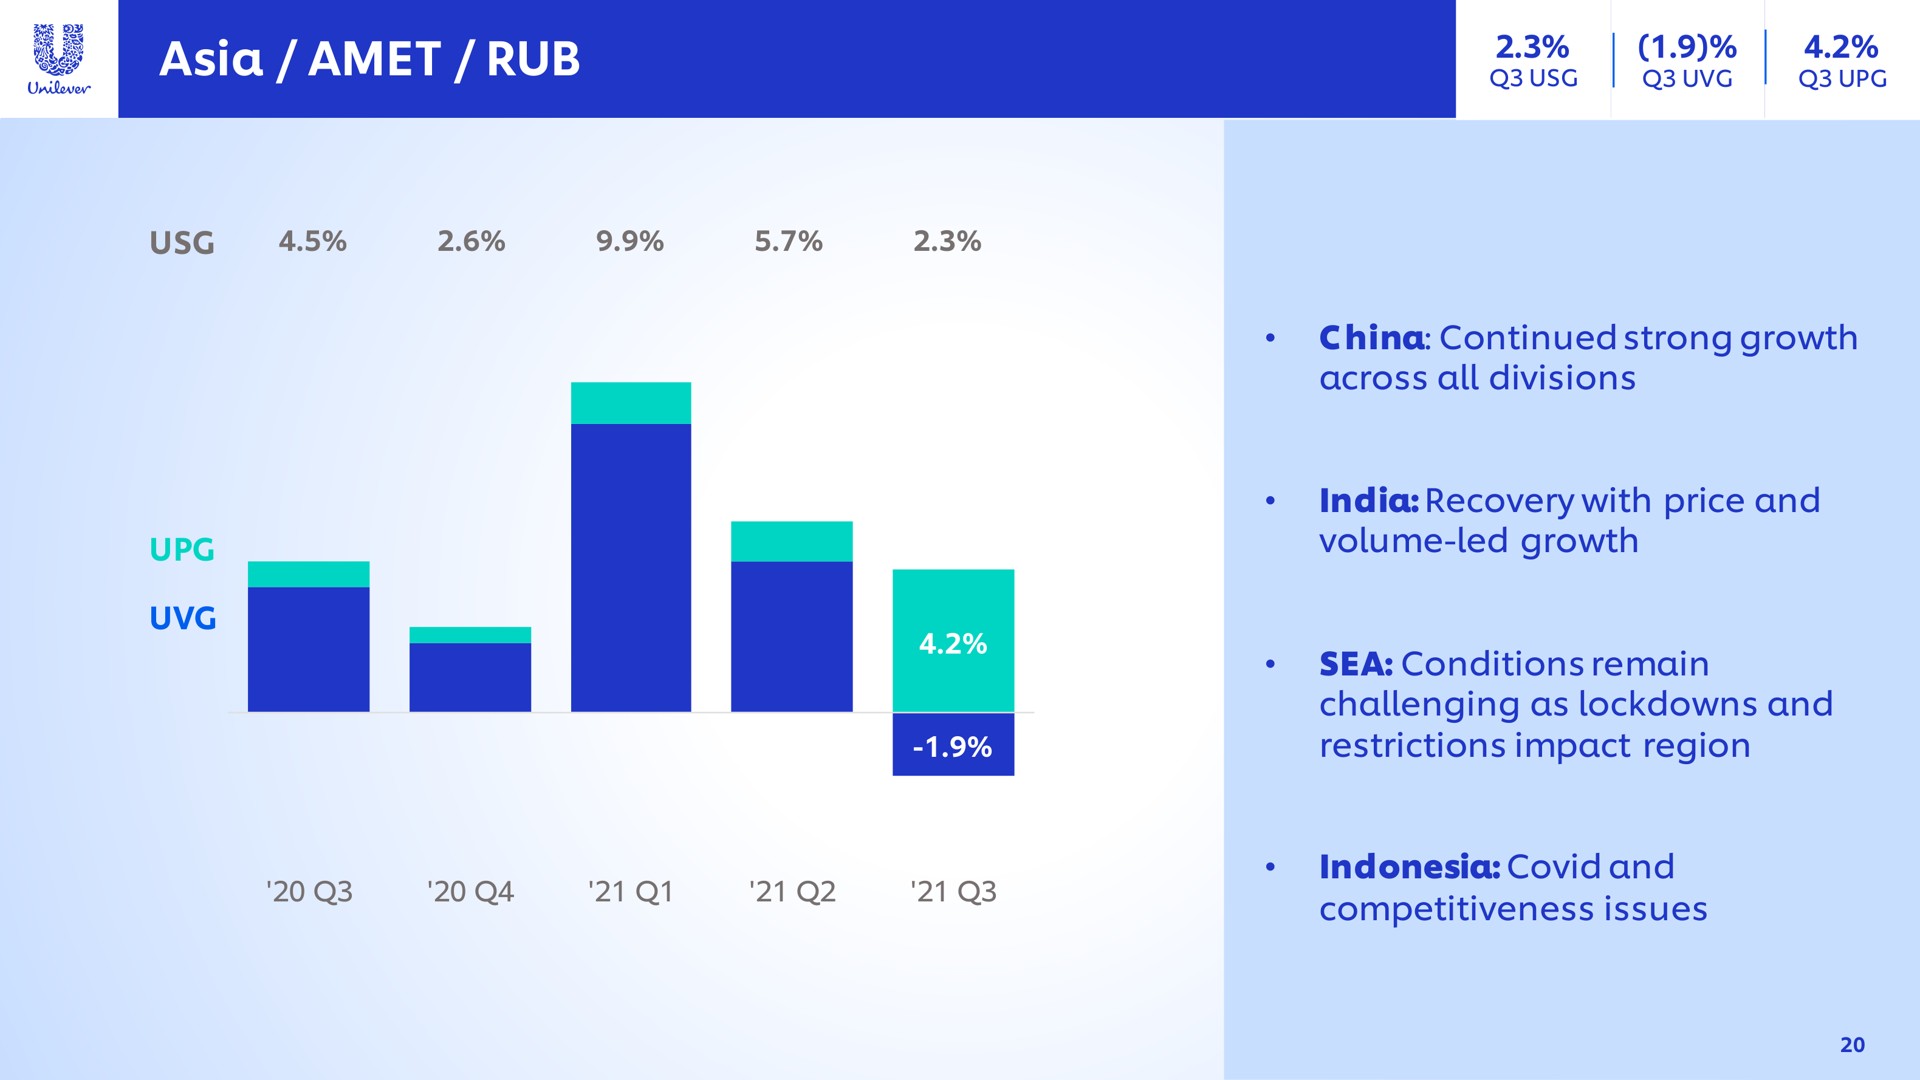 rub china continued strong growth across all divisions recovery with price and volume led growth challenging as and restrictions impact region covid and competitiveness issues | Unilever